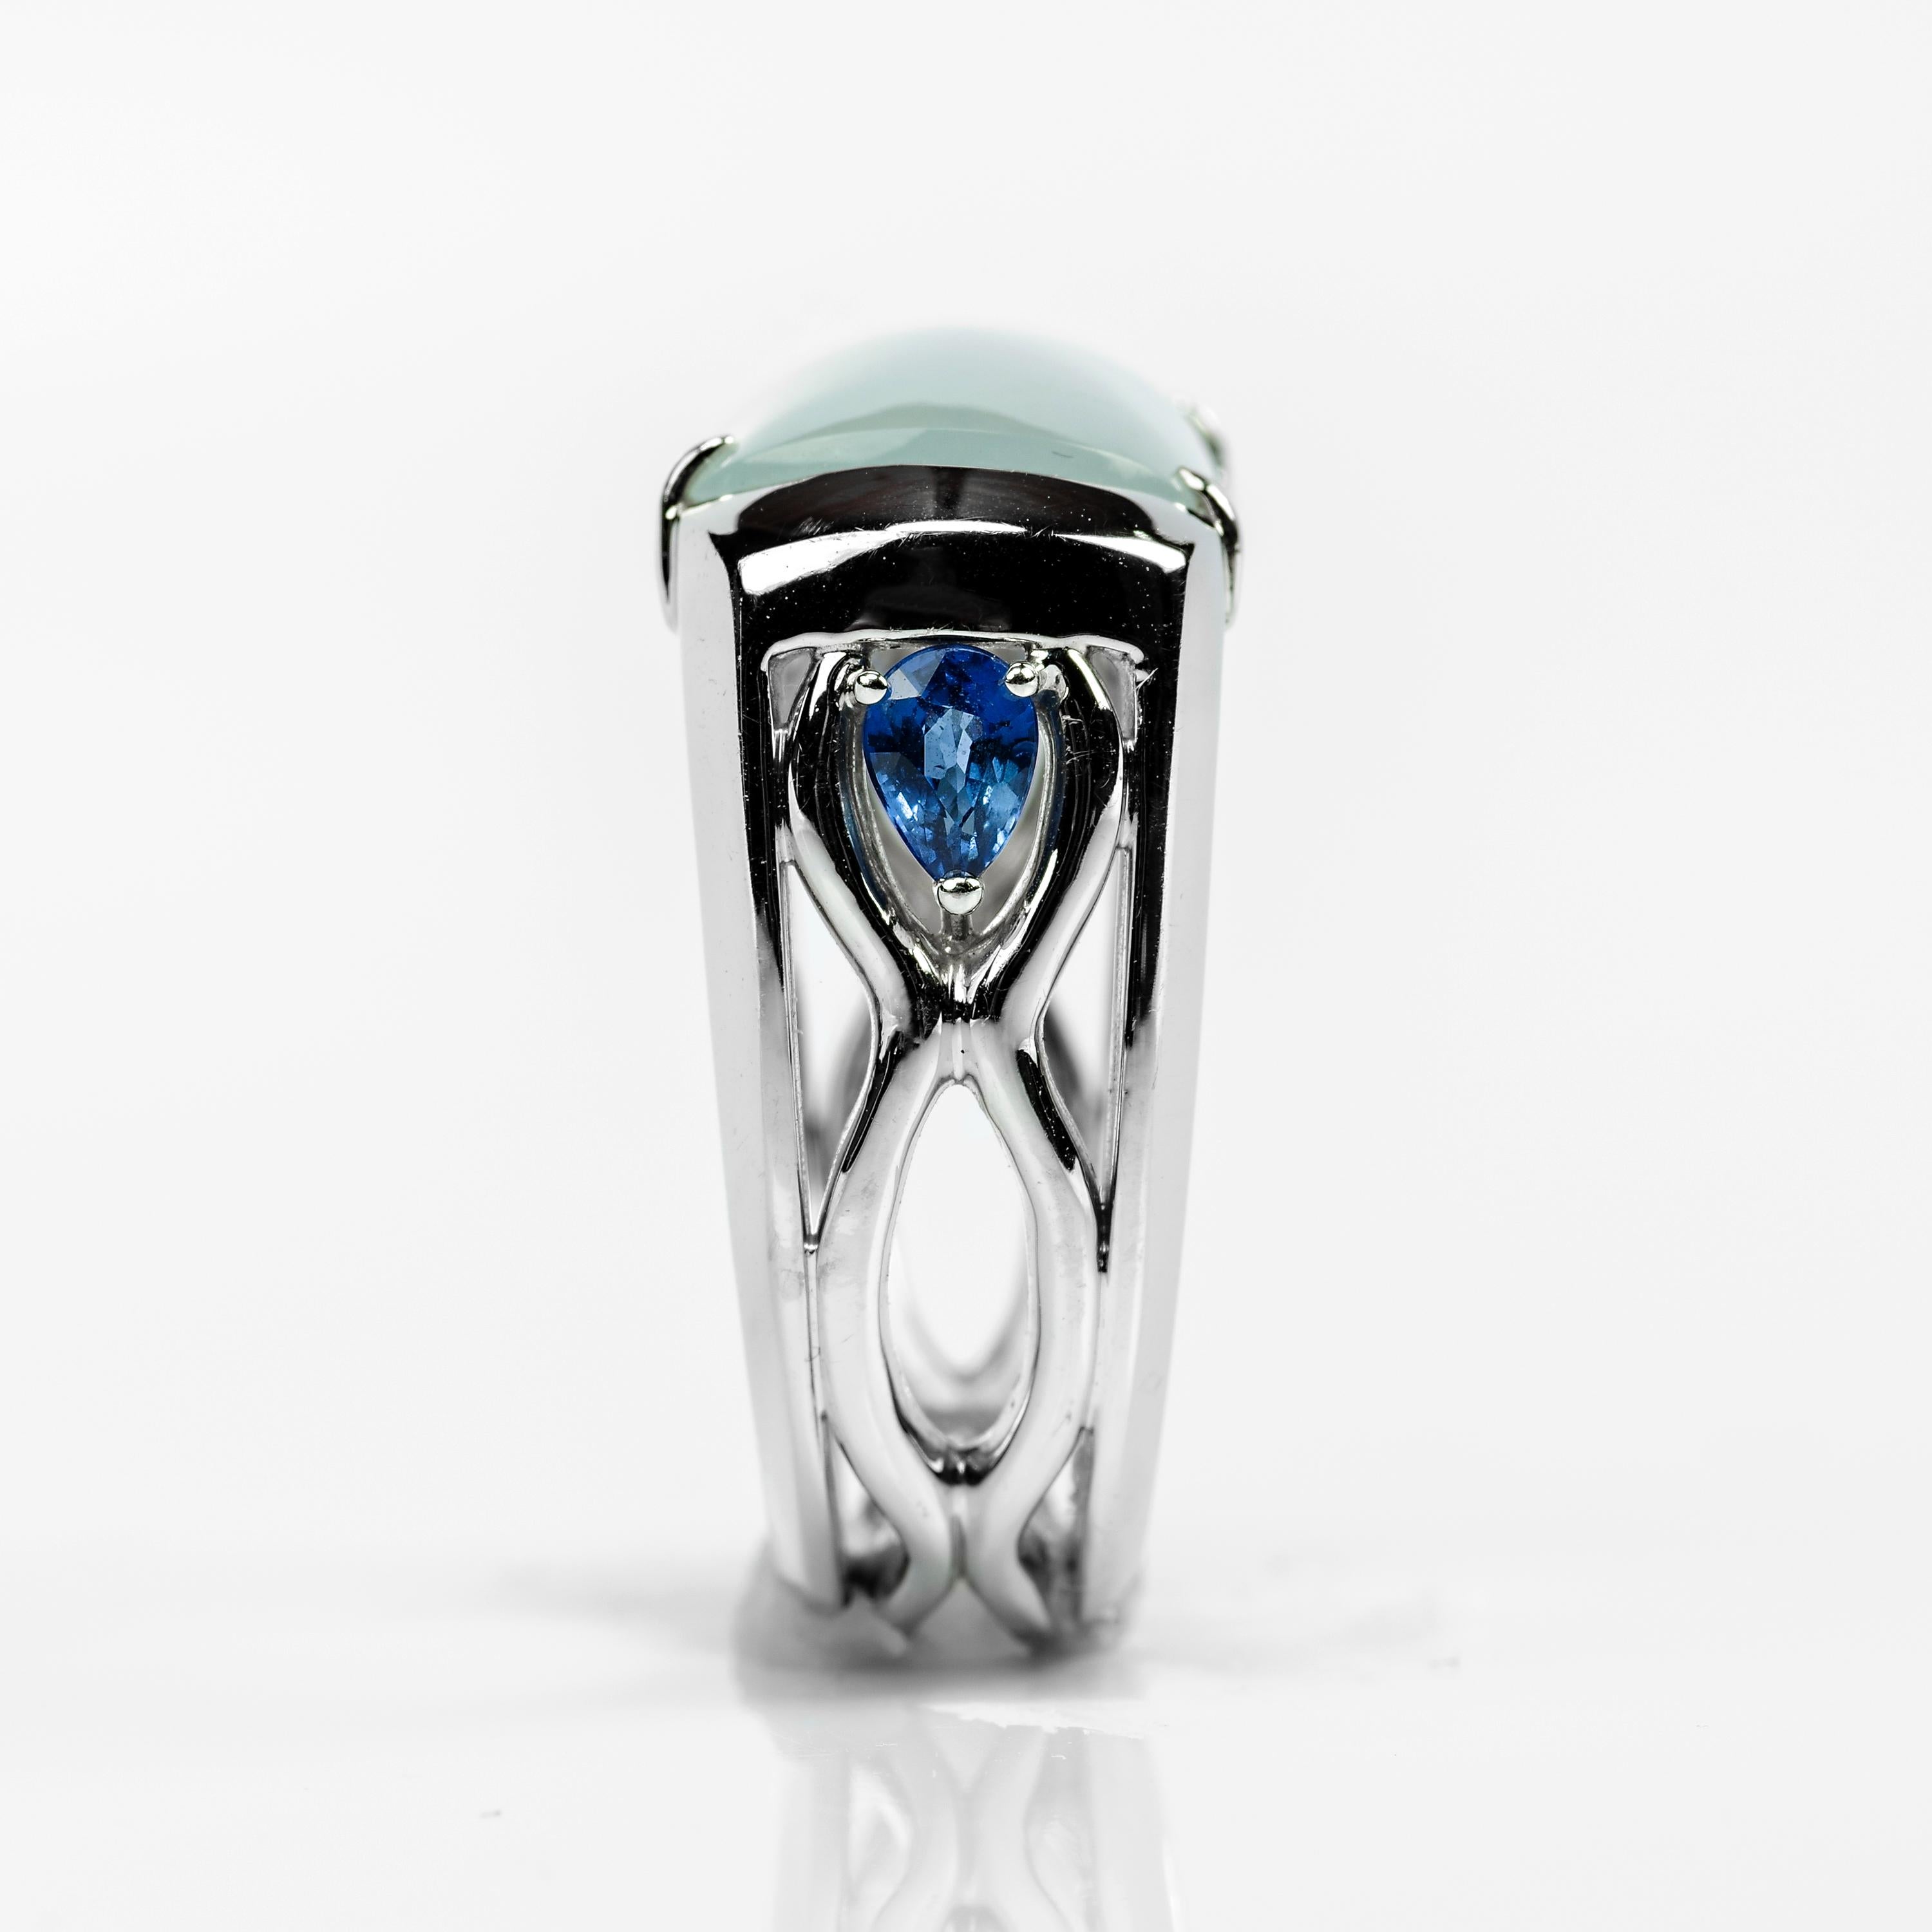 Contemporary Jade Saddle Ring Semi-Transparent Architectural Setting with Sapphires Certified